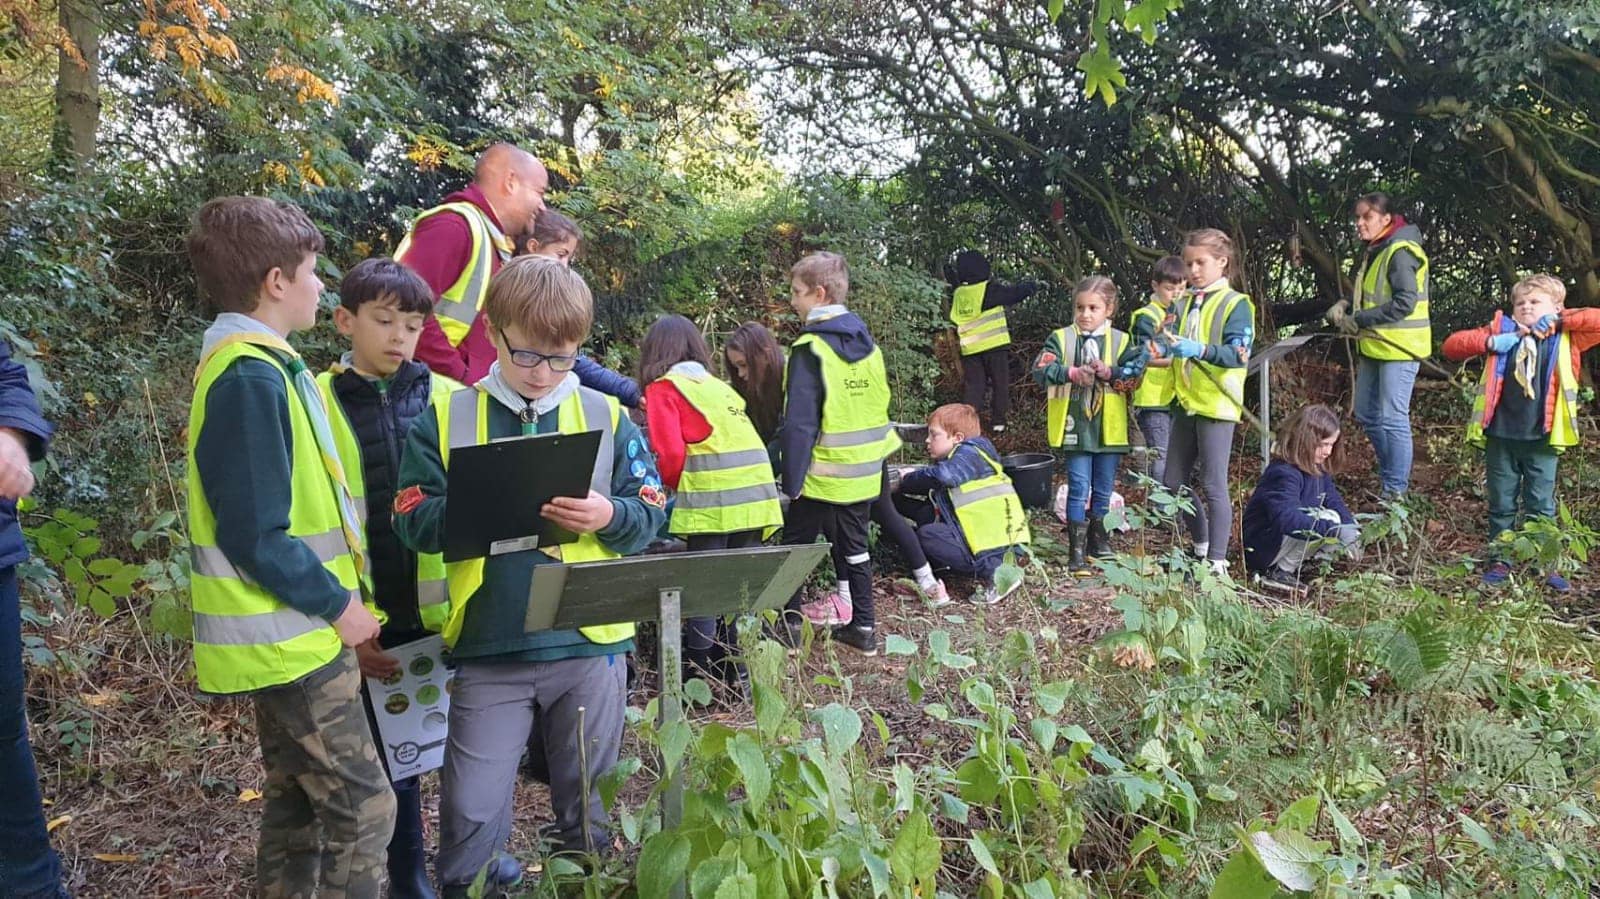 Scouts group doing community service